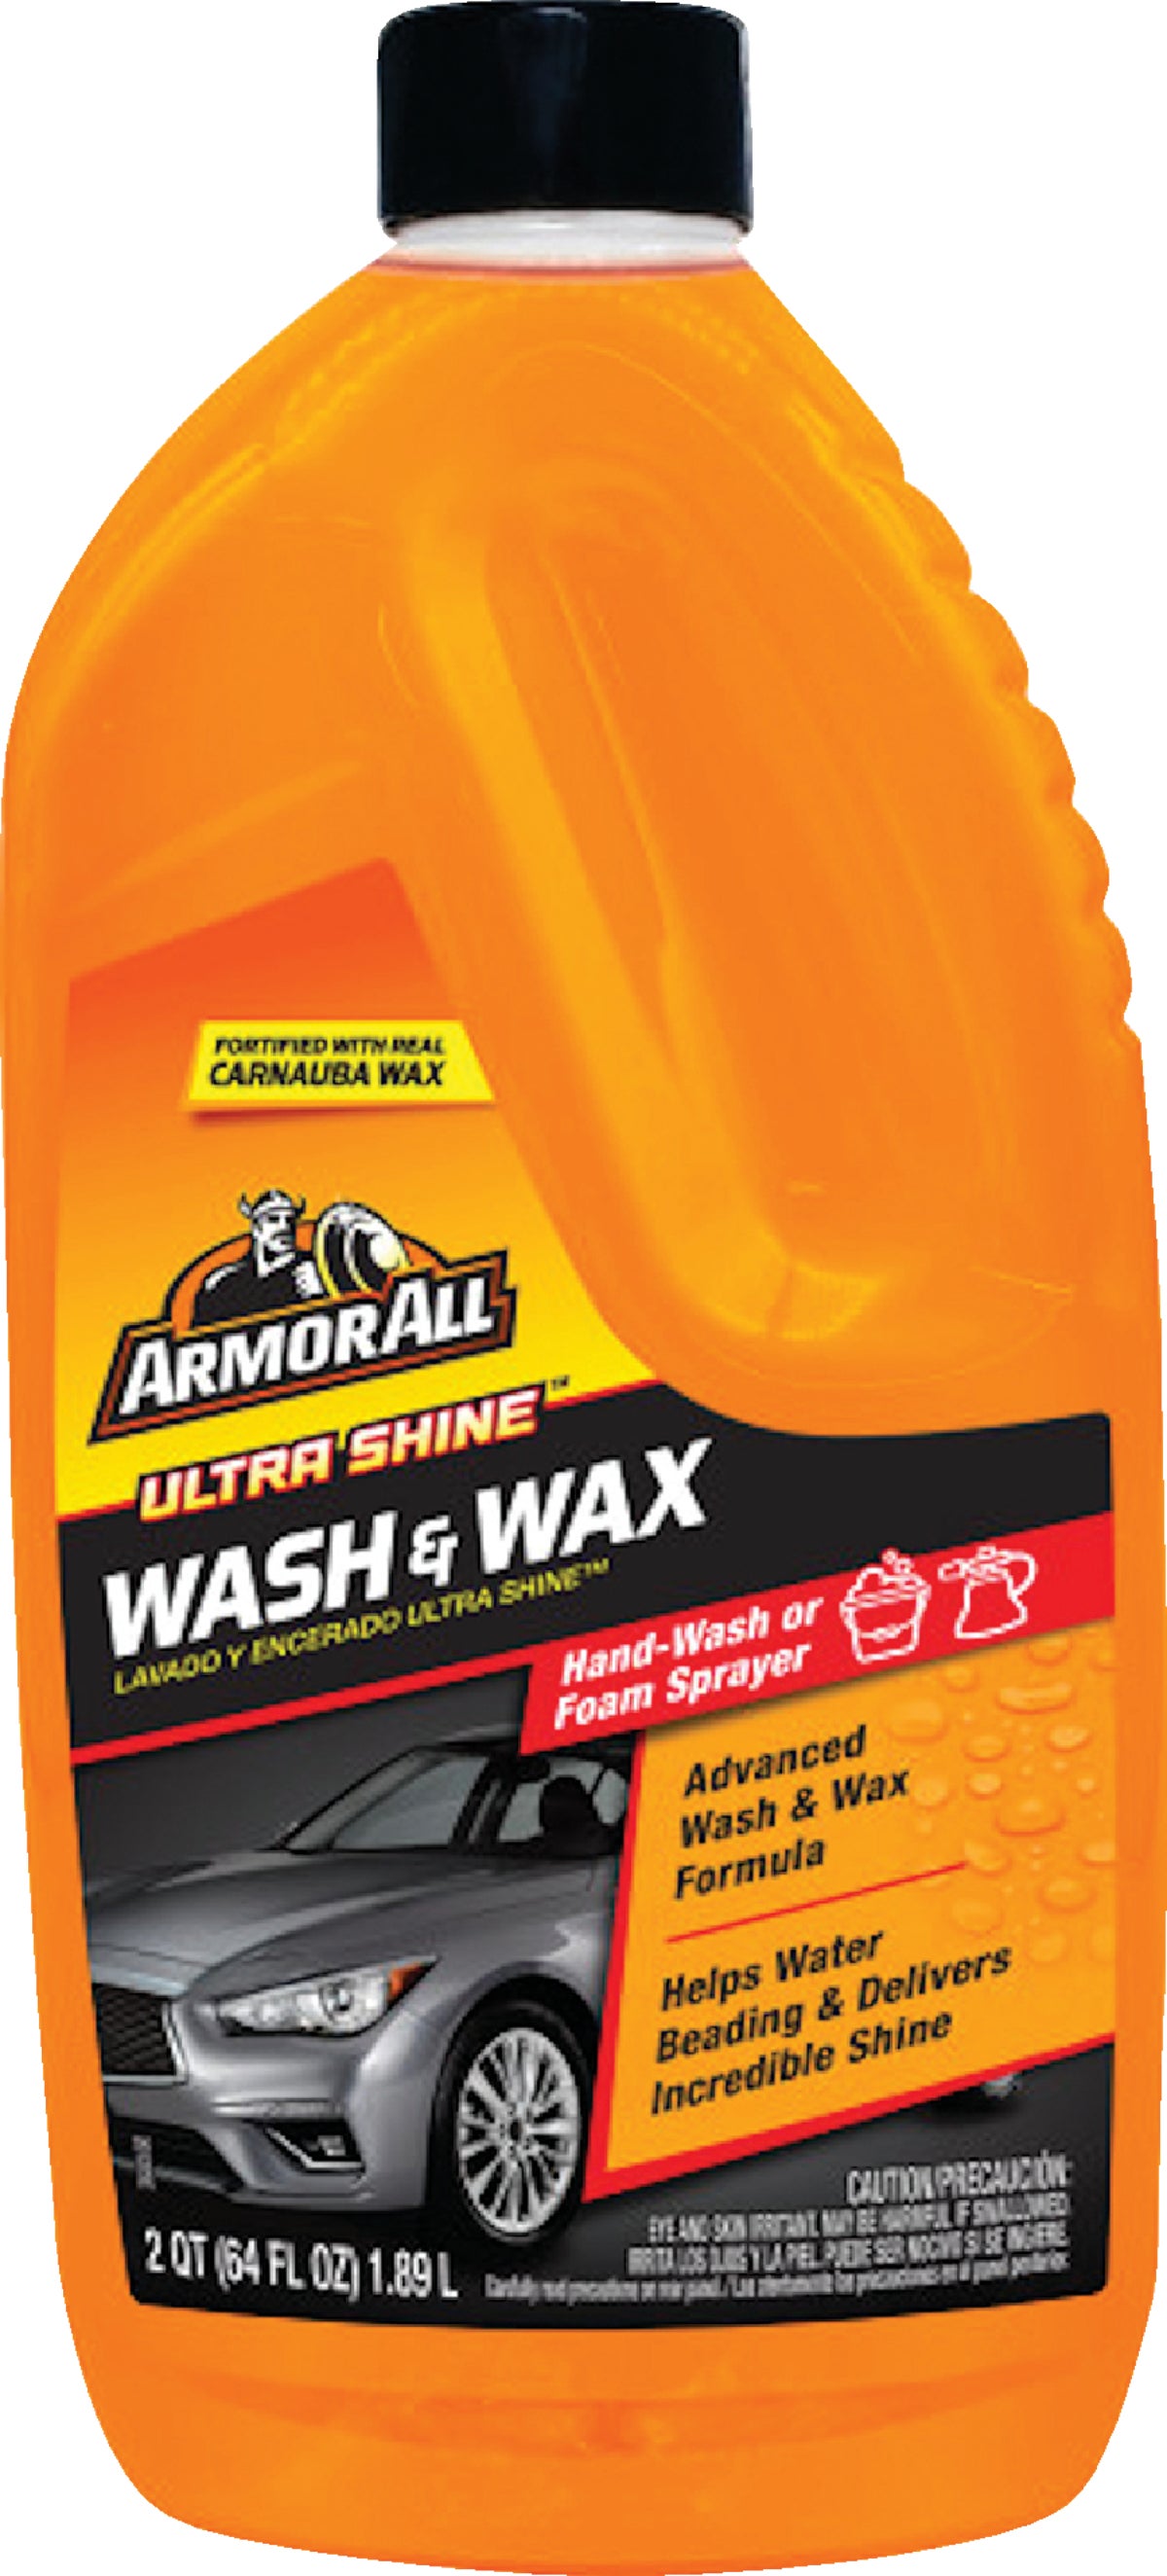 Armor All Ultra Shine Car Wash and Wax, Cleaning for Cars, Truck,  Motorcycle, 64 Fl Oz, 4 Pack, 10346